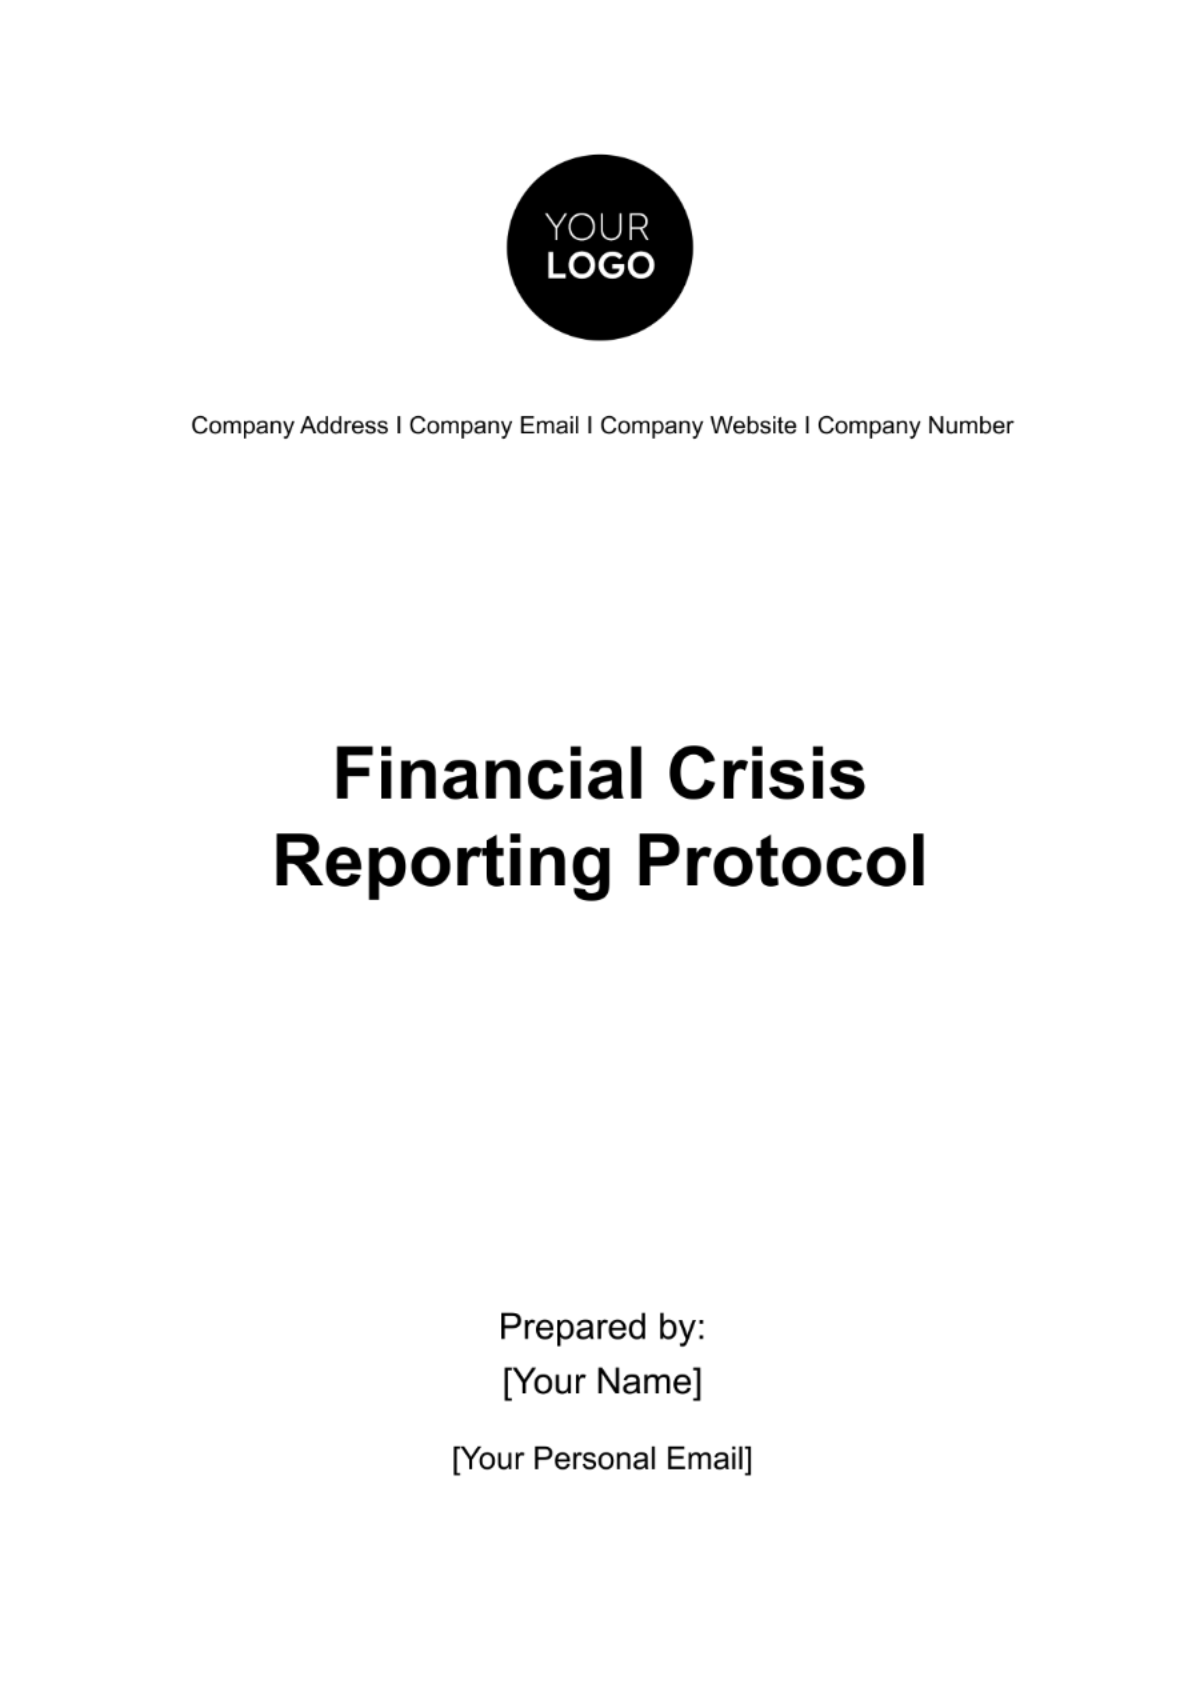 Financial Crisis Reporting Protocol Template